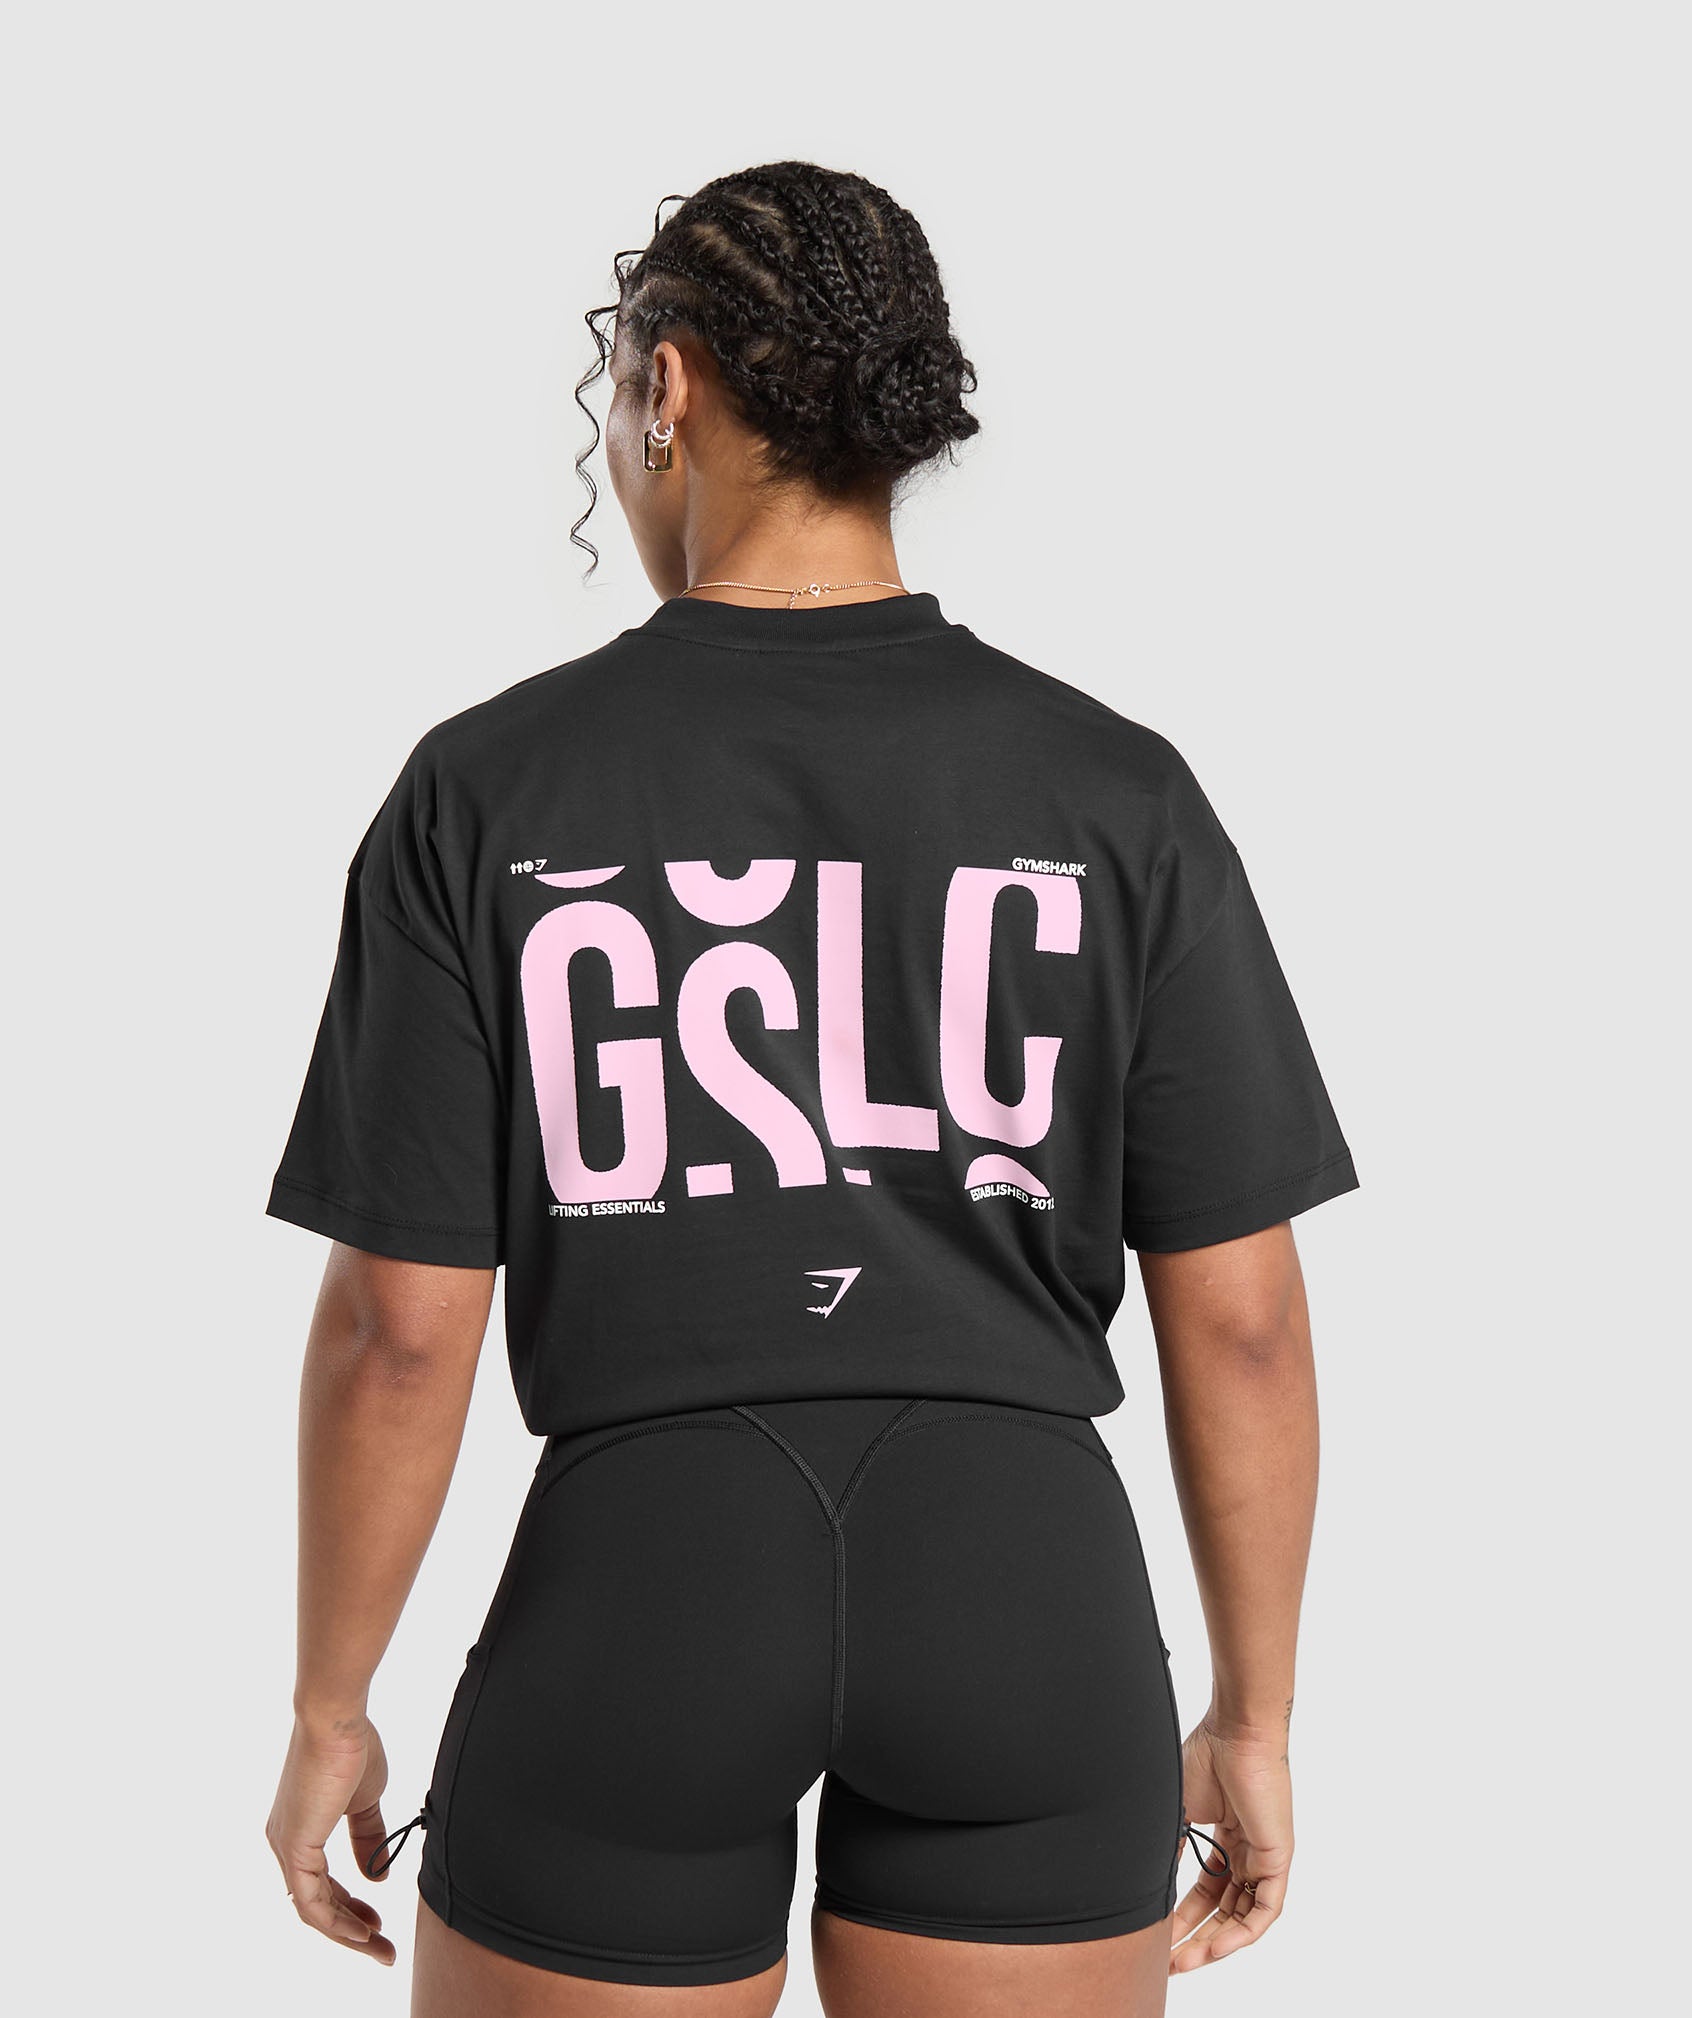 GSLC OS Tee in Black - view 1